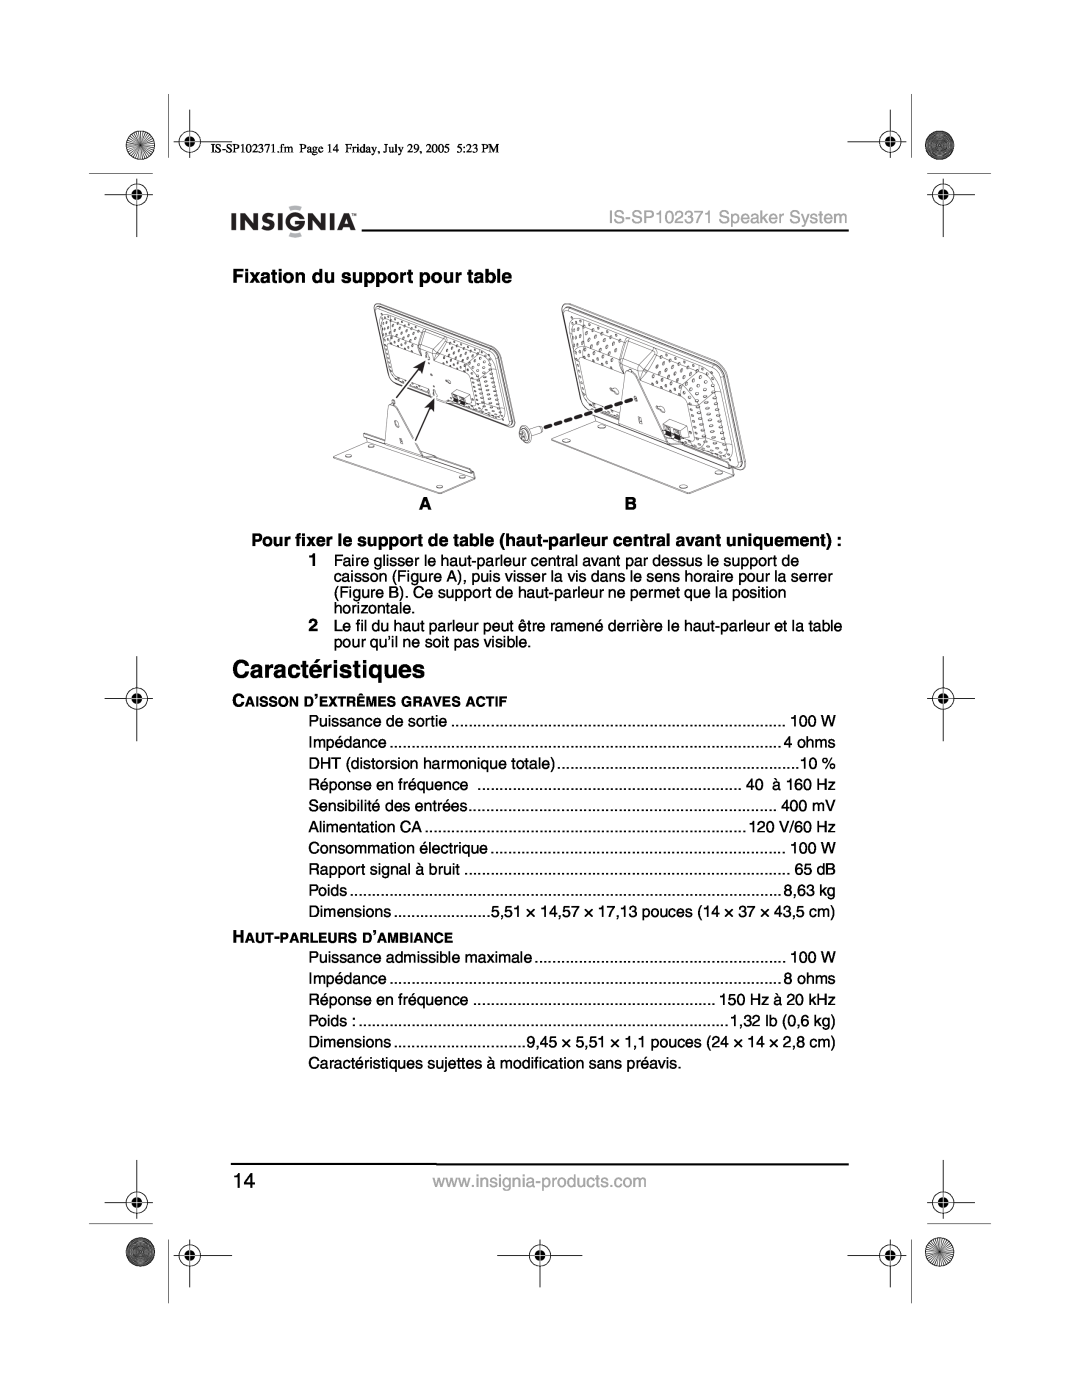 Insignia manual Caractéristiques, Fixation du support pour table, IS-SP102371Speaker System 